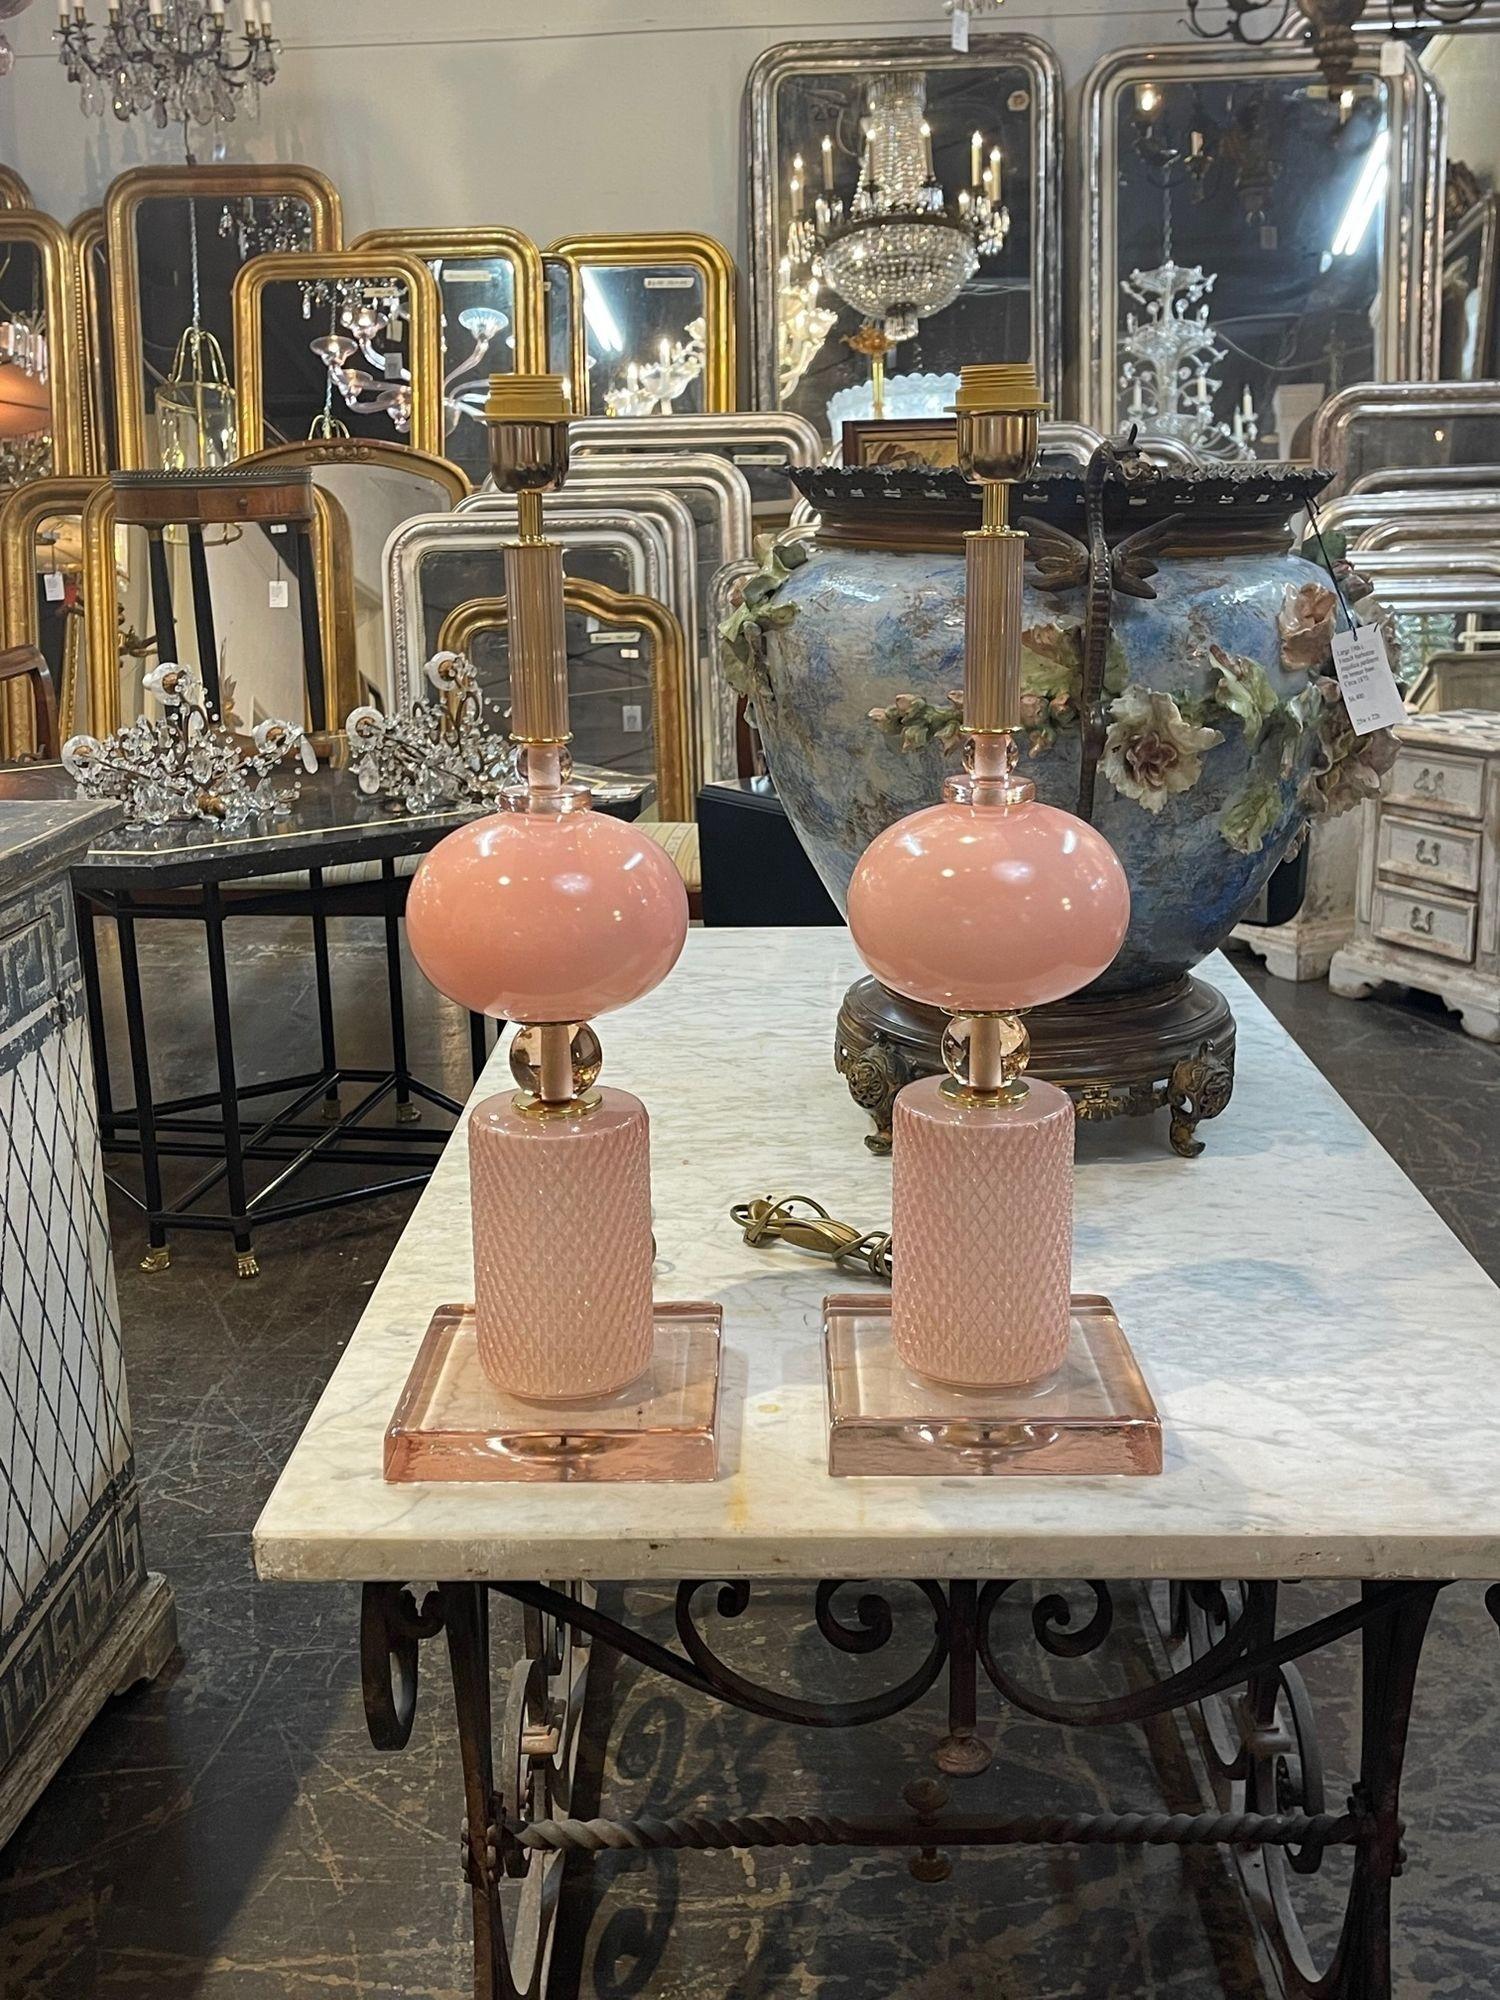 Very fine pair of modern pink Murano glass lamps. Makes an elegant statement in a fine home. Gorgeous!!